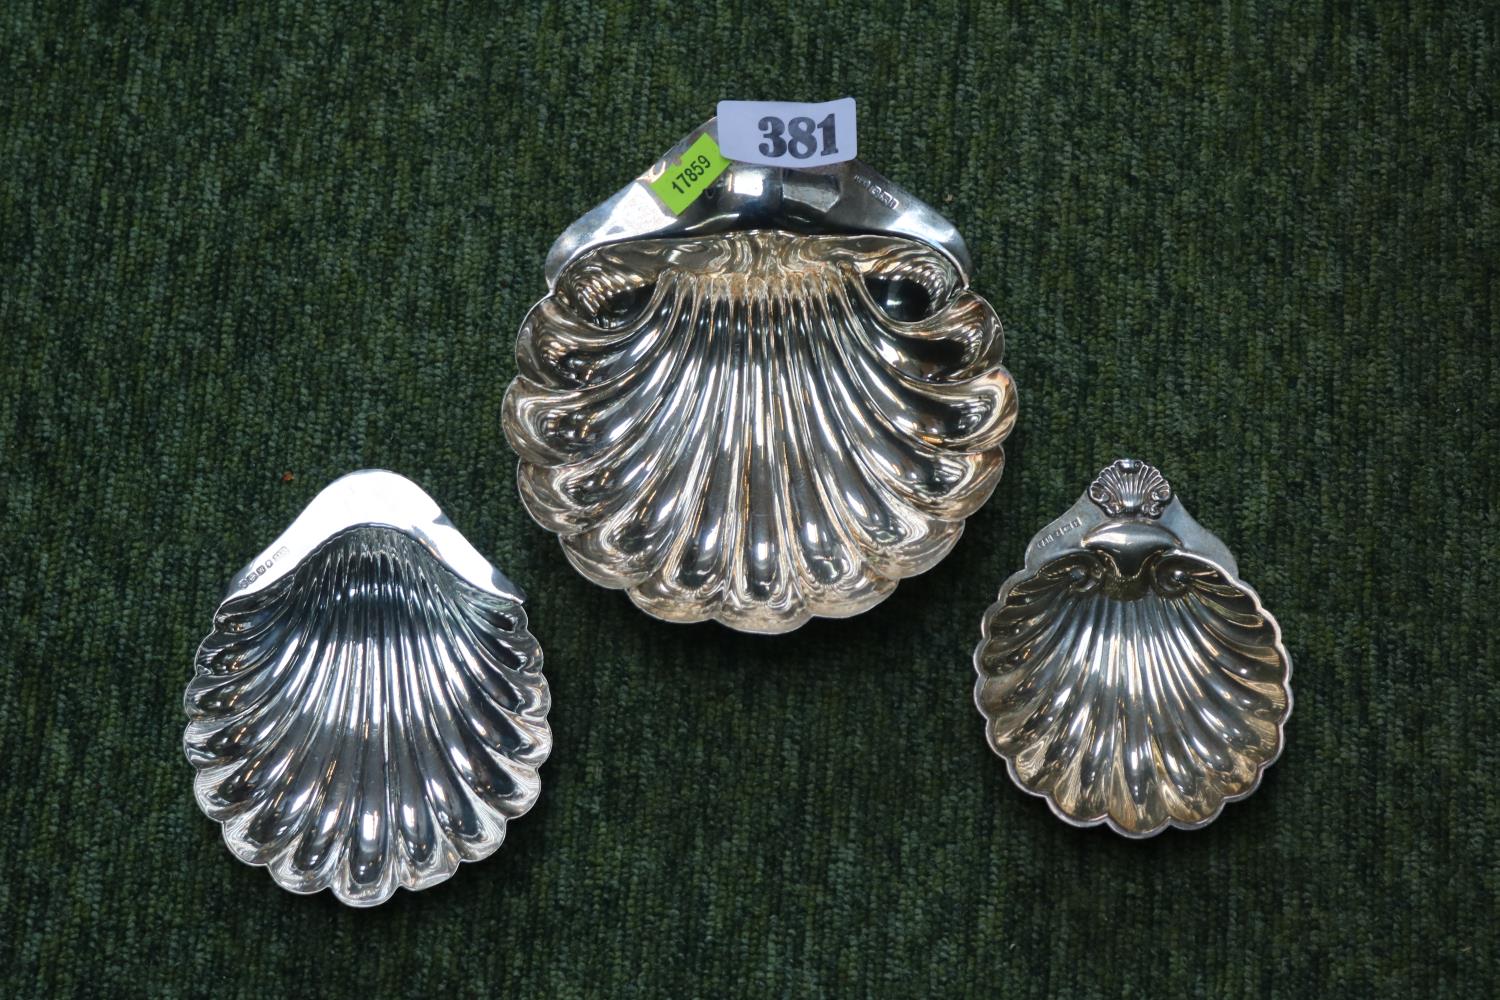 Collection of Silver Scallop Dishes 220g total weight